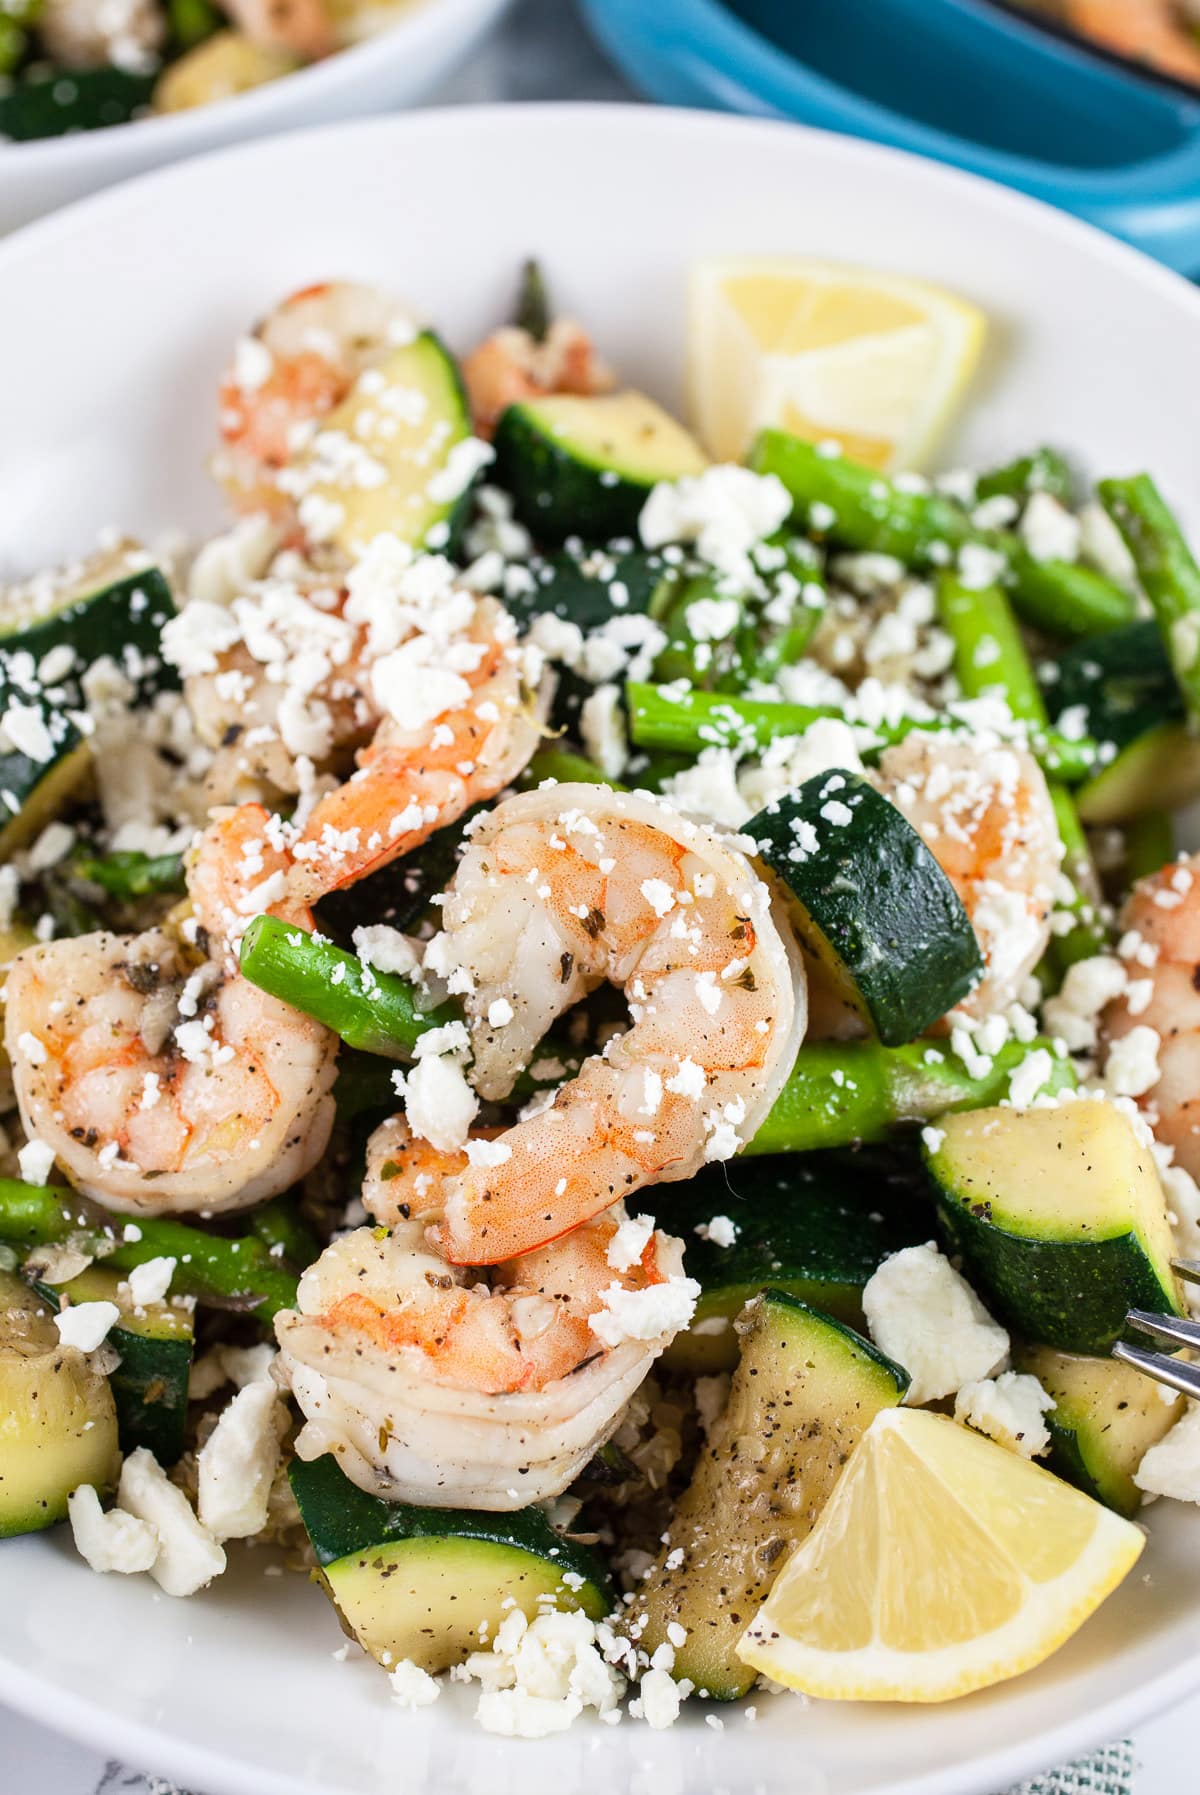 Skillet shrimp with asparagus, zucchini, feta cheese, and lemon wedges in white bowls.